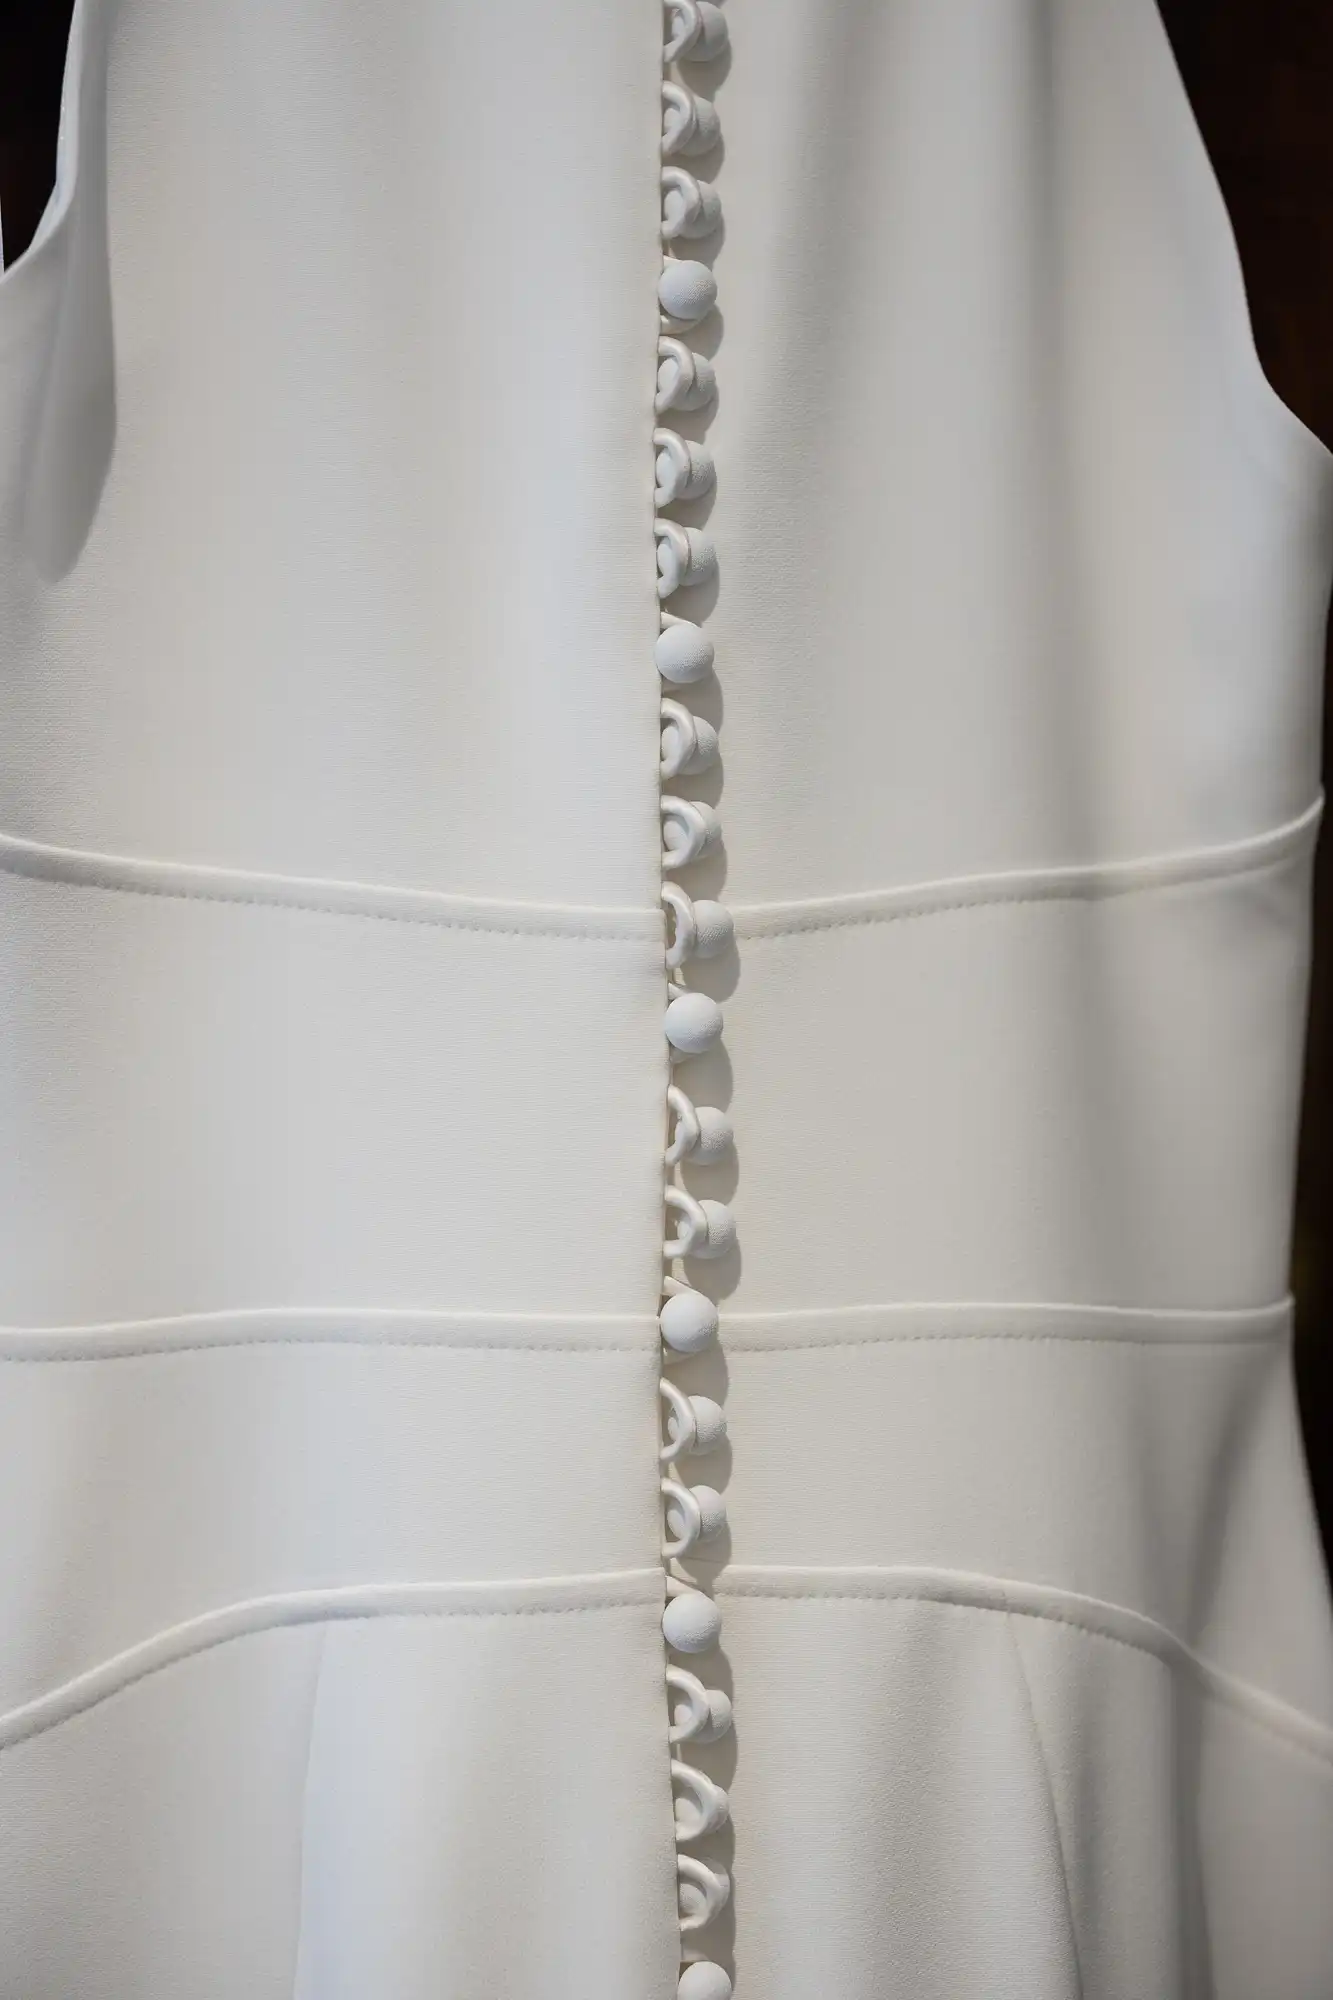 Close-up of a white garment with a detailed row of small, round buttons running vertically down the back.